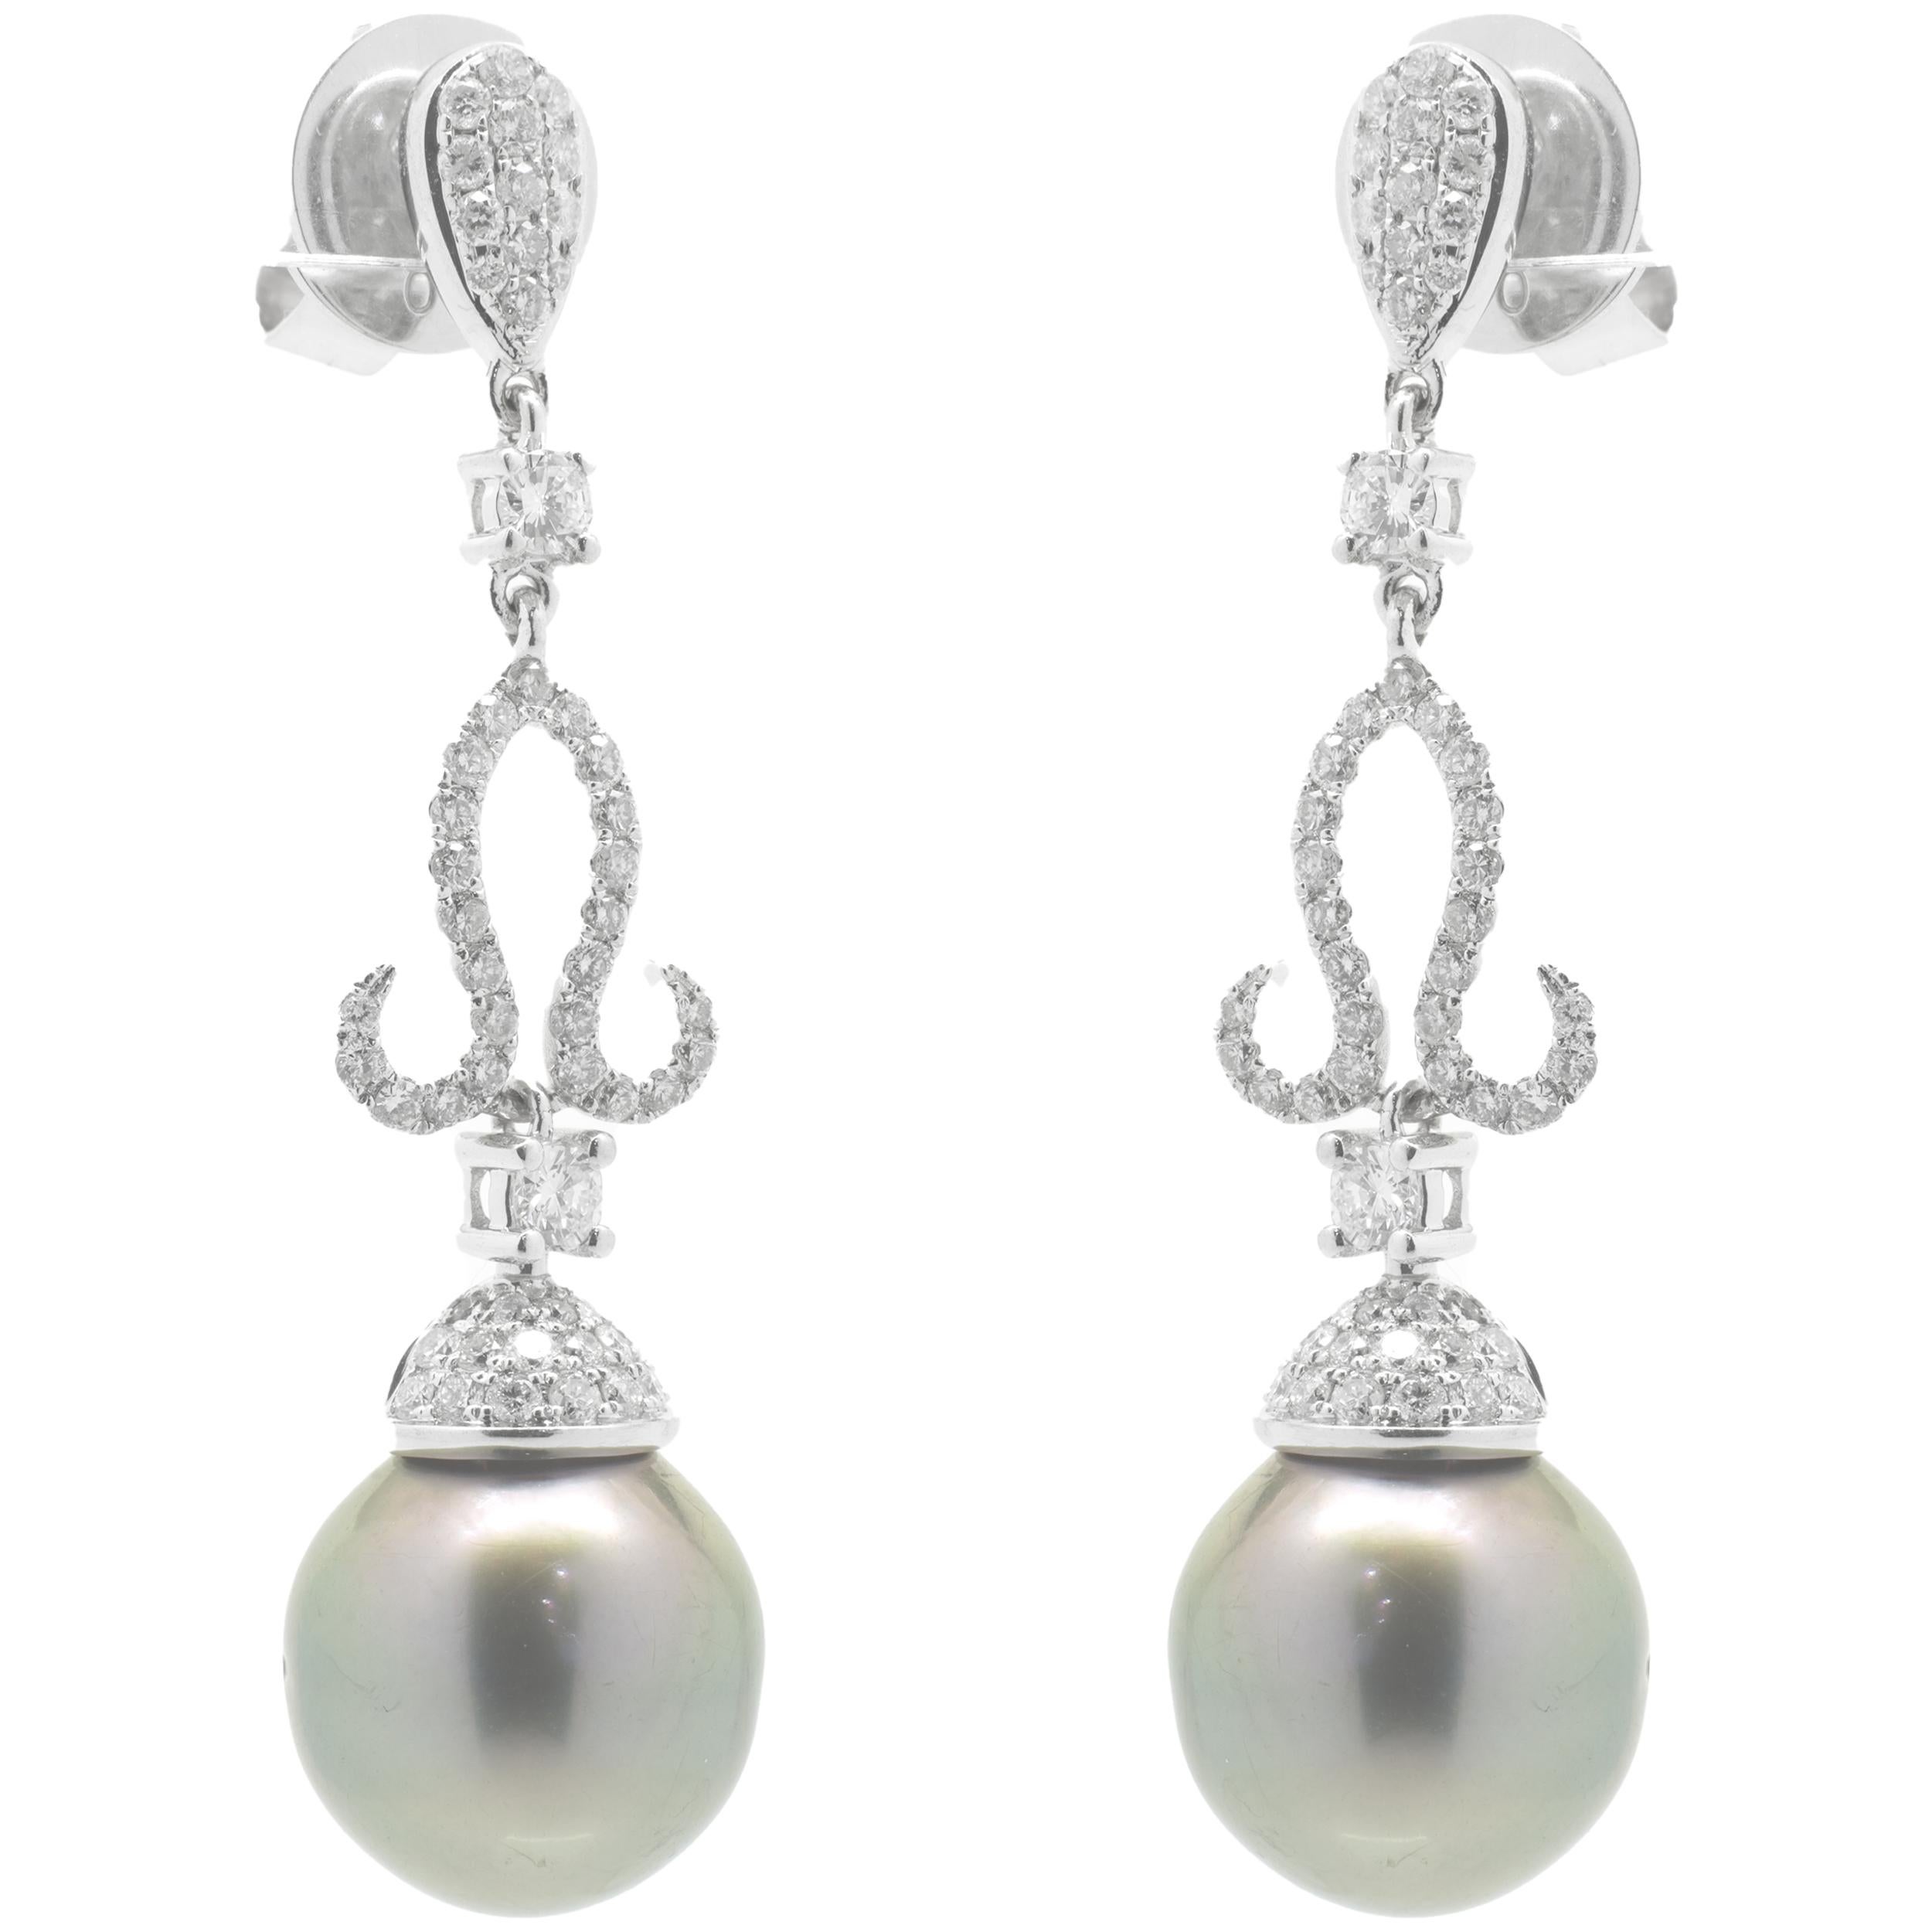 Designer: custom designed
Material: 18K white gold
Pearls: 2  semi round Tahitian pearls
Diamonds: round brilliant cut = 1.00cttw
Color: G
Clarity: VS1-2
Fastenings: posts with friction backs
Dimensions: earrings measure 43mm in length 
Weight: 9.73